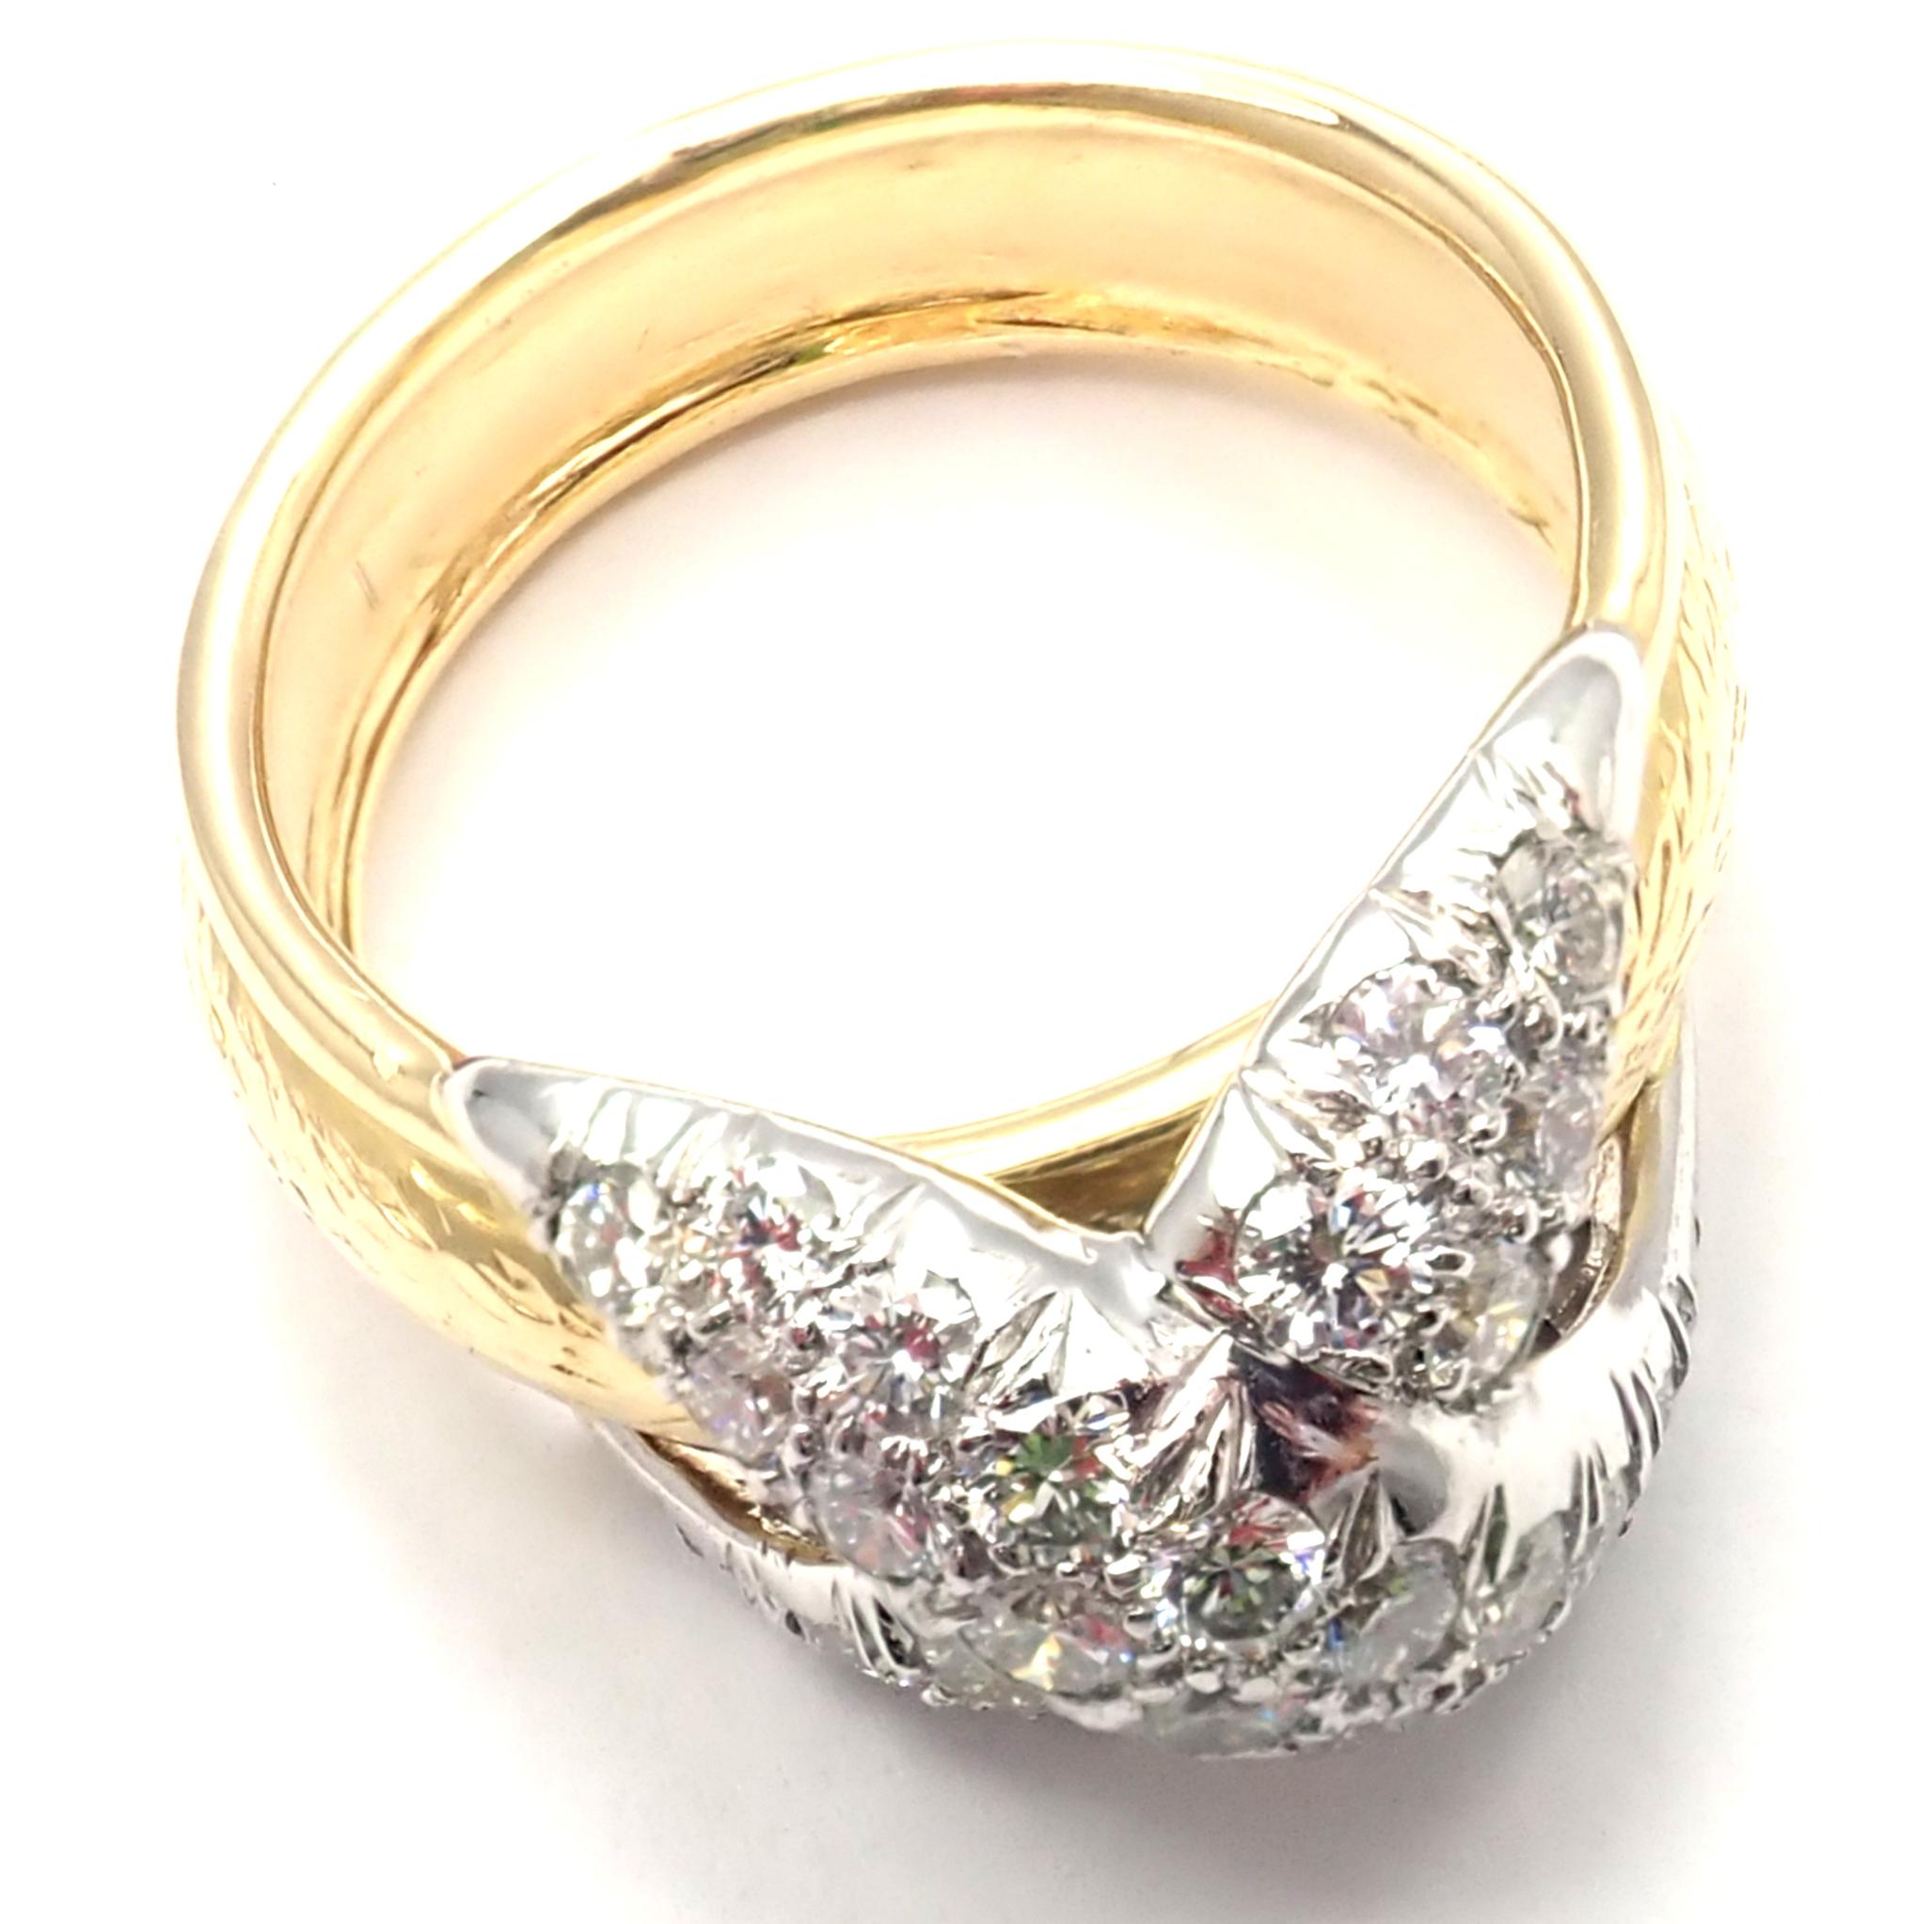 Brilliant Cut Tiffany & Co. Jean Schlumberger Diamond X Yellow Gold and Platinum Band Ring